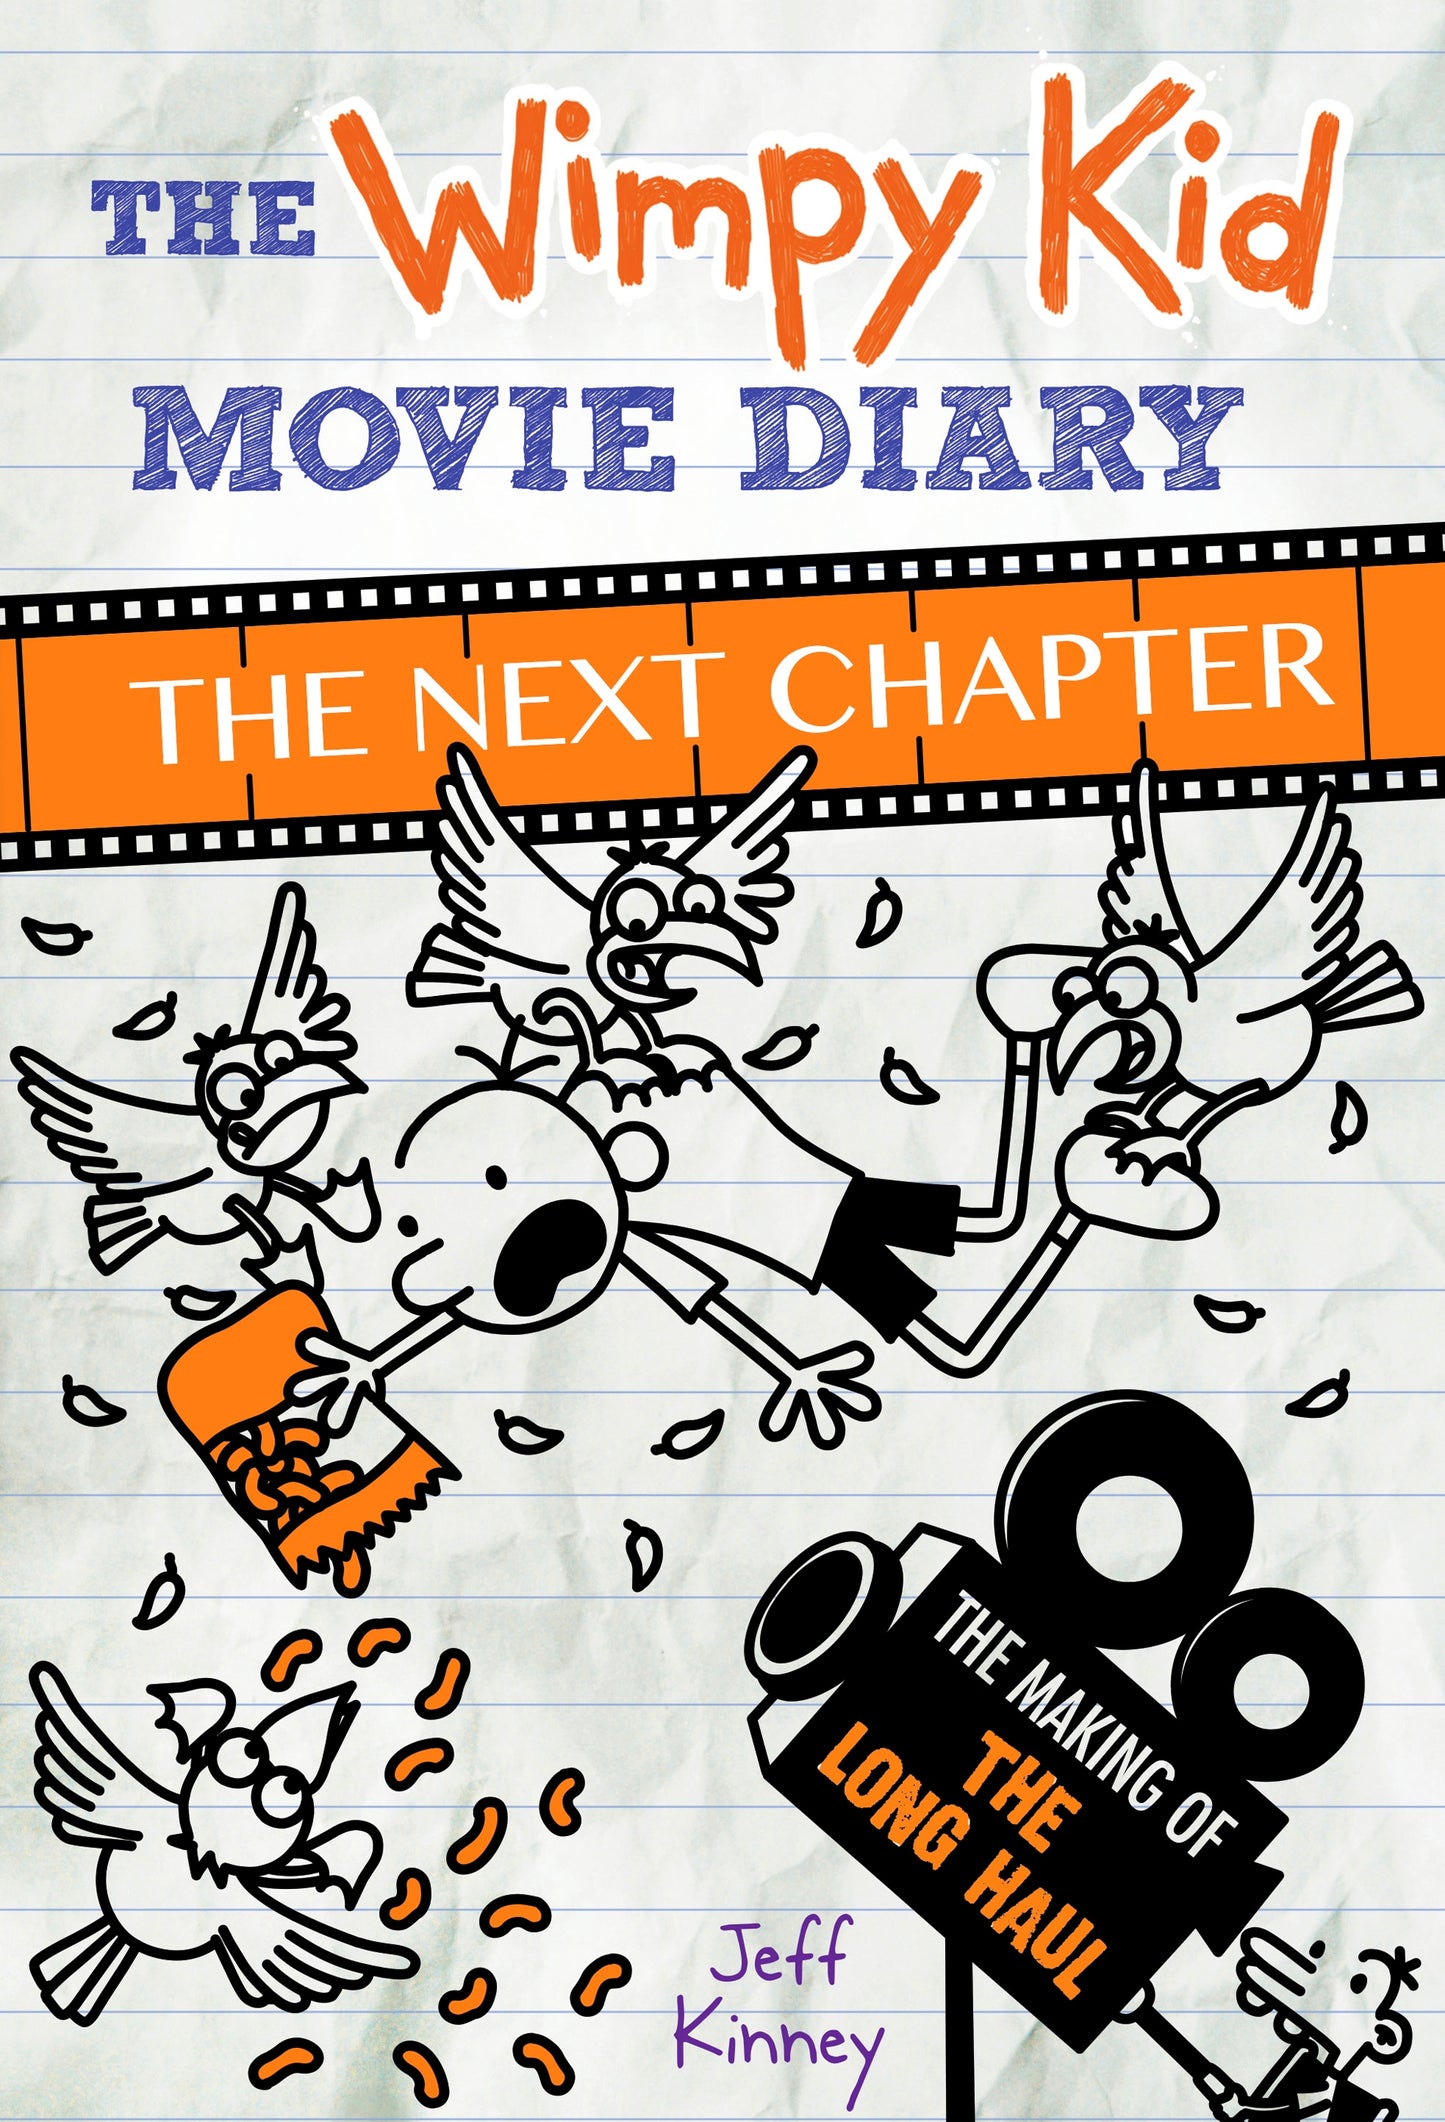 The Next Chapter - Diary Of A Wimpy Kid